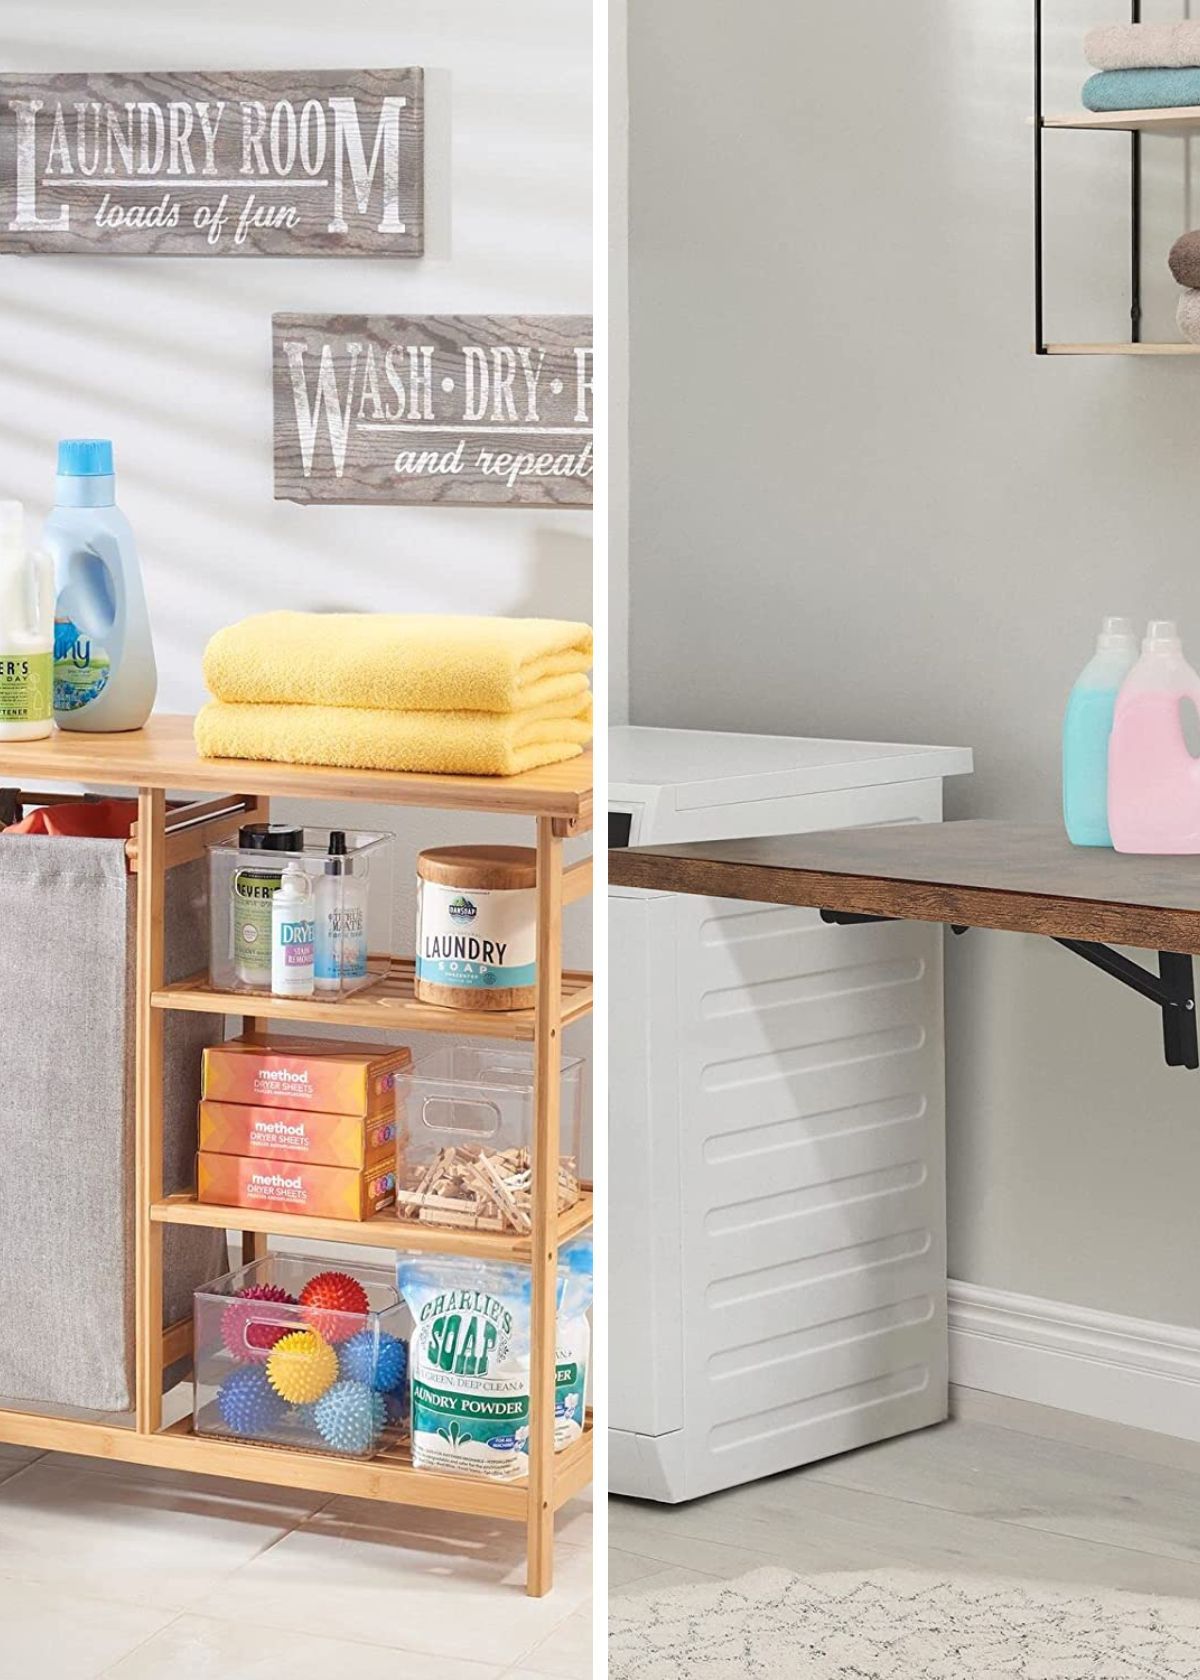 The Top 5 Folding Tables For Your Room!